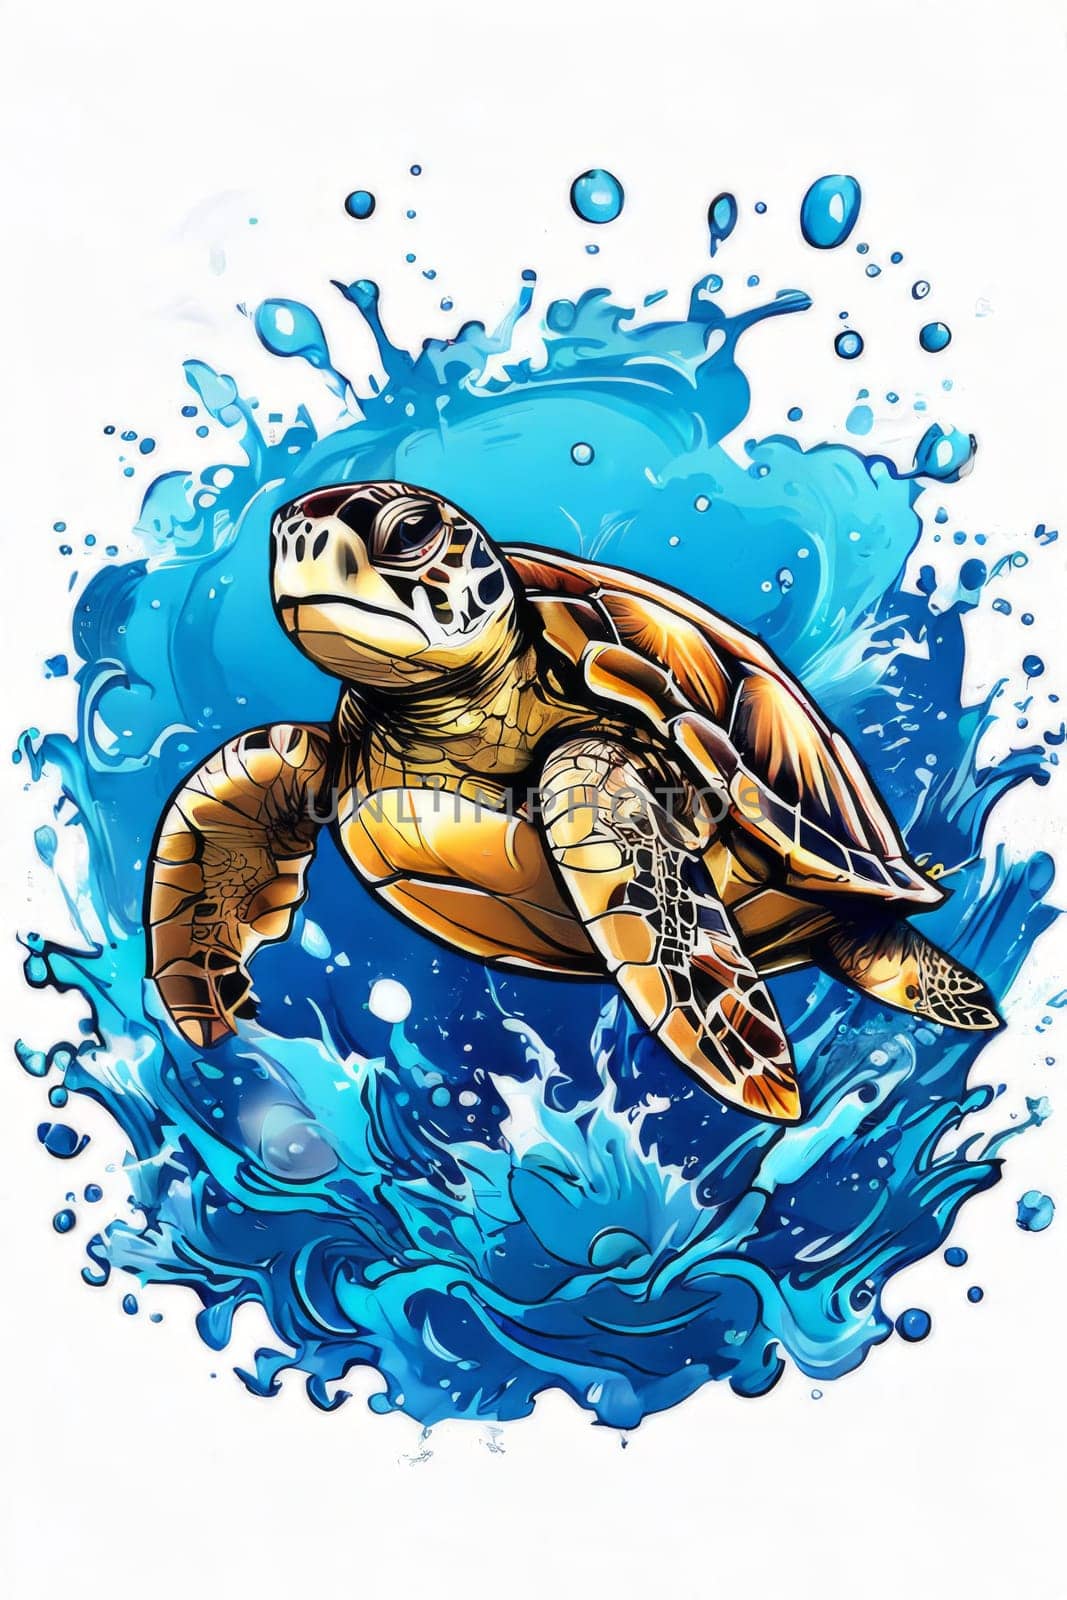 Turtle swimming in ocean, peacefully navigates its underwater world. For Tshirt design, fashion, clothing design, posters, postcards, other merchandise with marine theme, childrens books, tourism